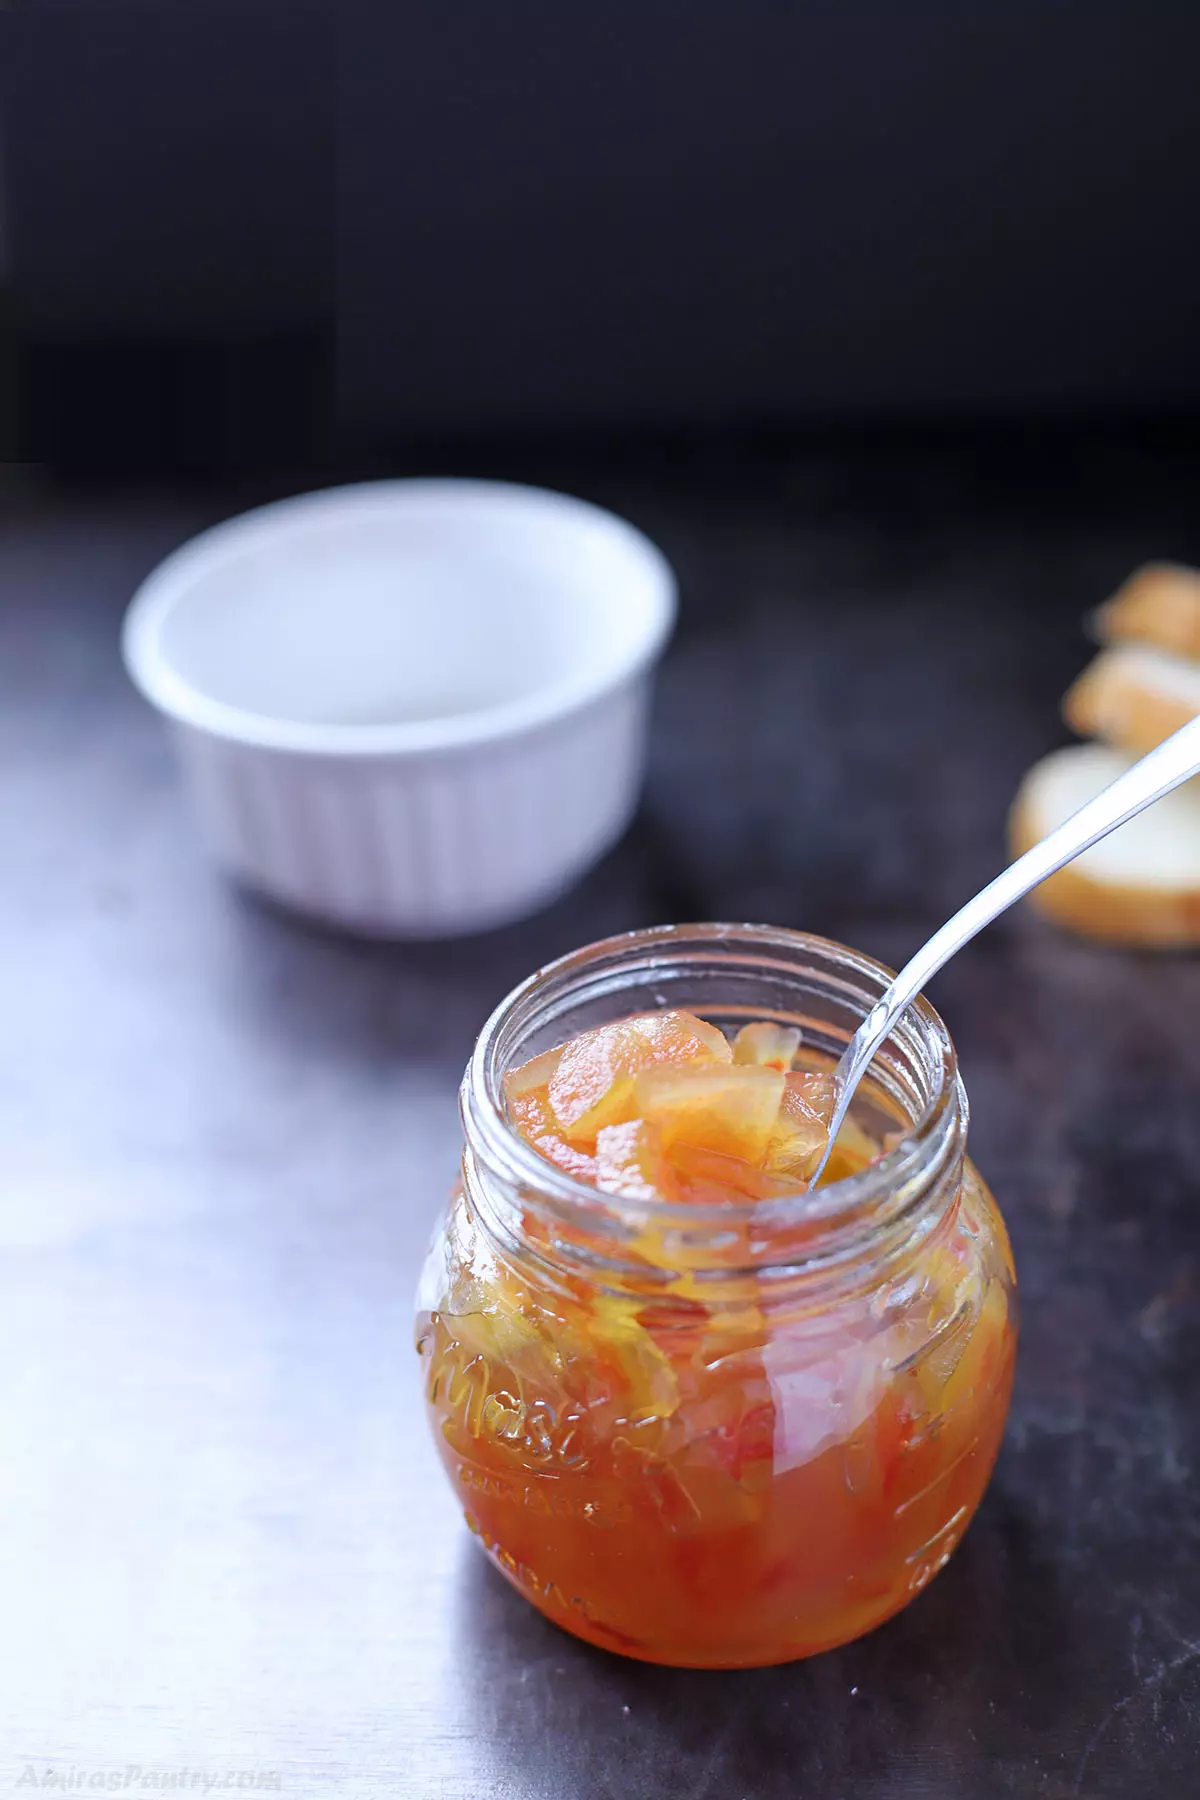 A spoon scooping some watermelon rind preserves from a jar.